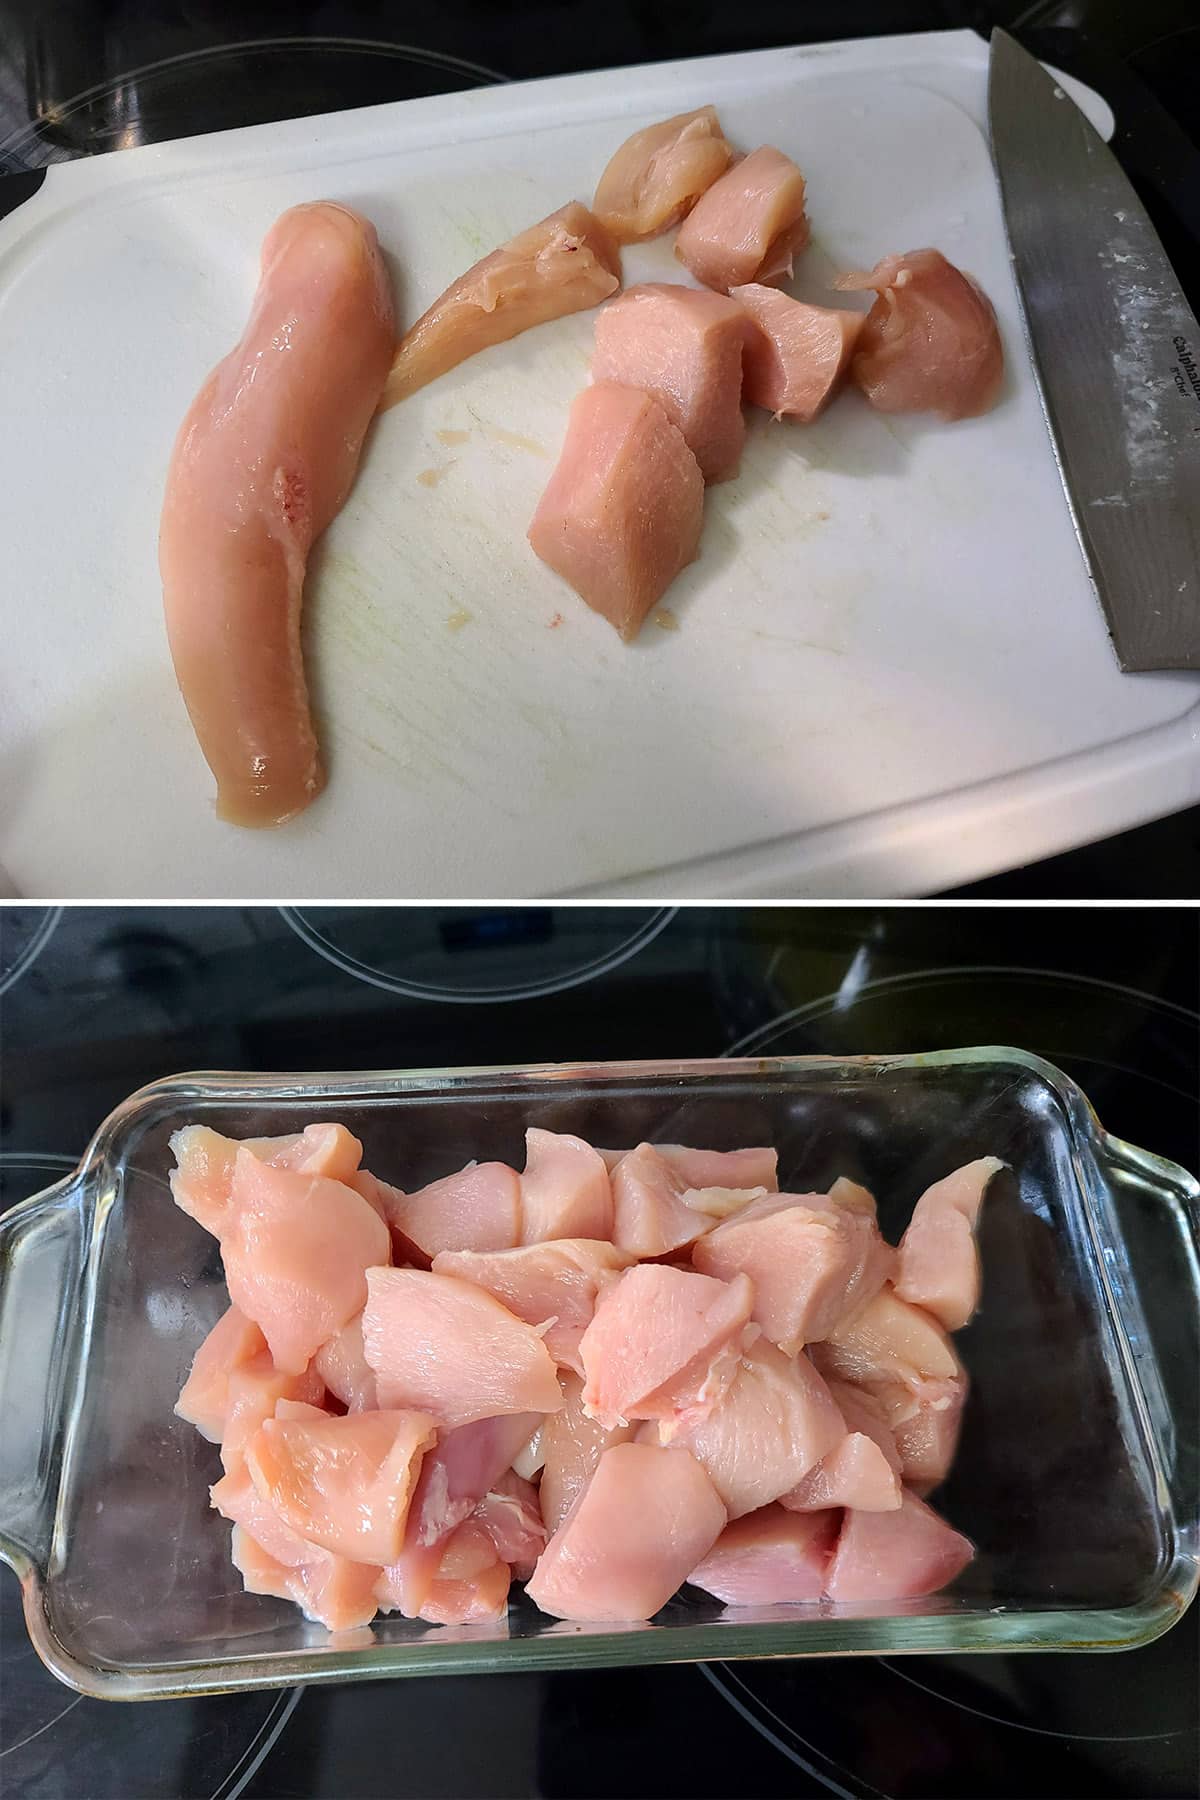 A 3 part image showing the chicken being cut into pieces.